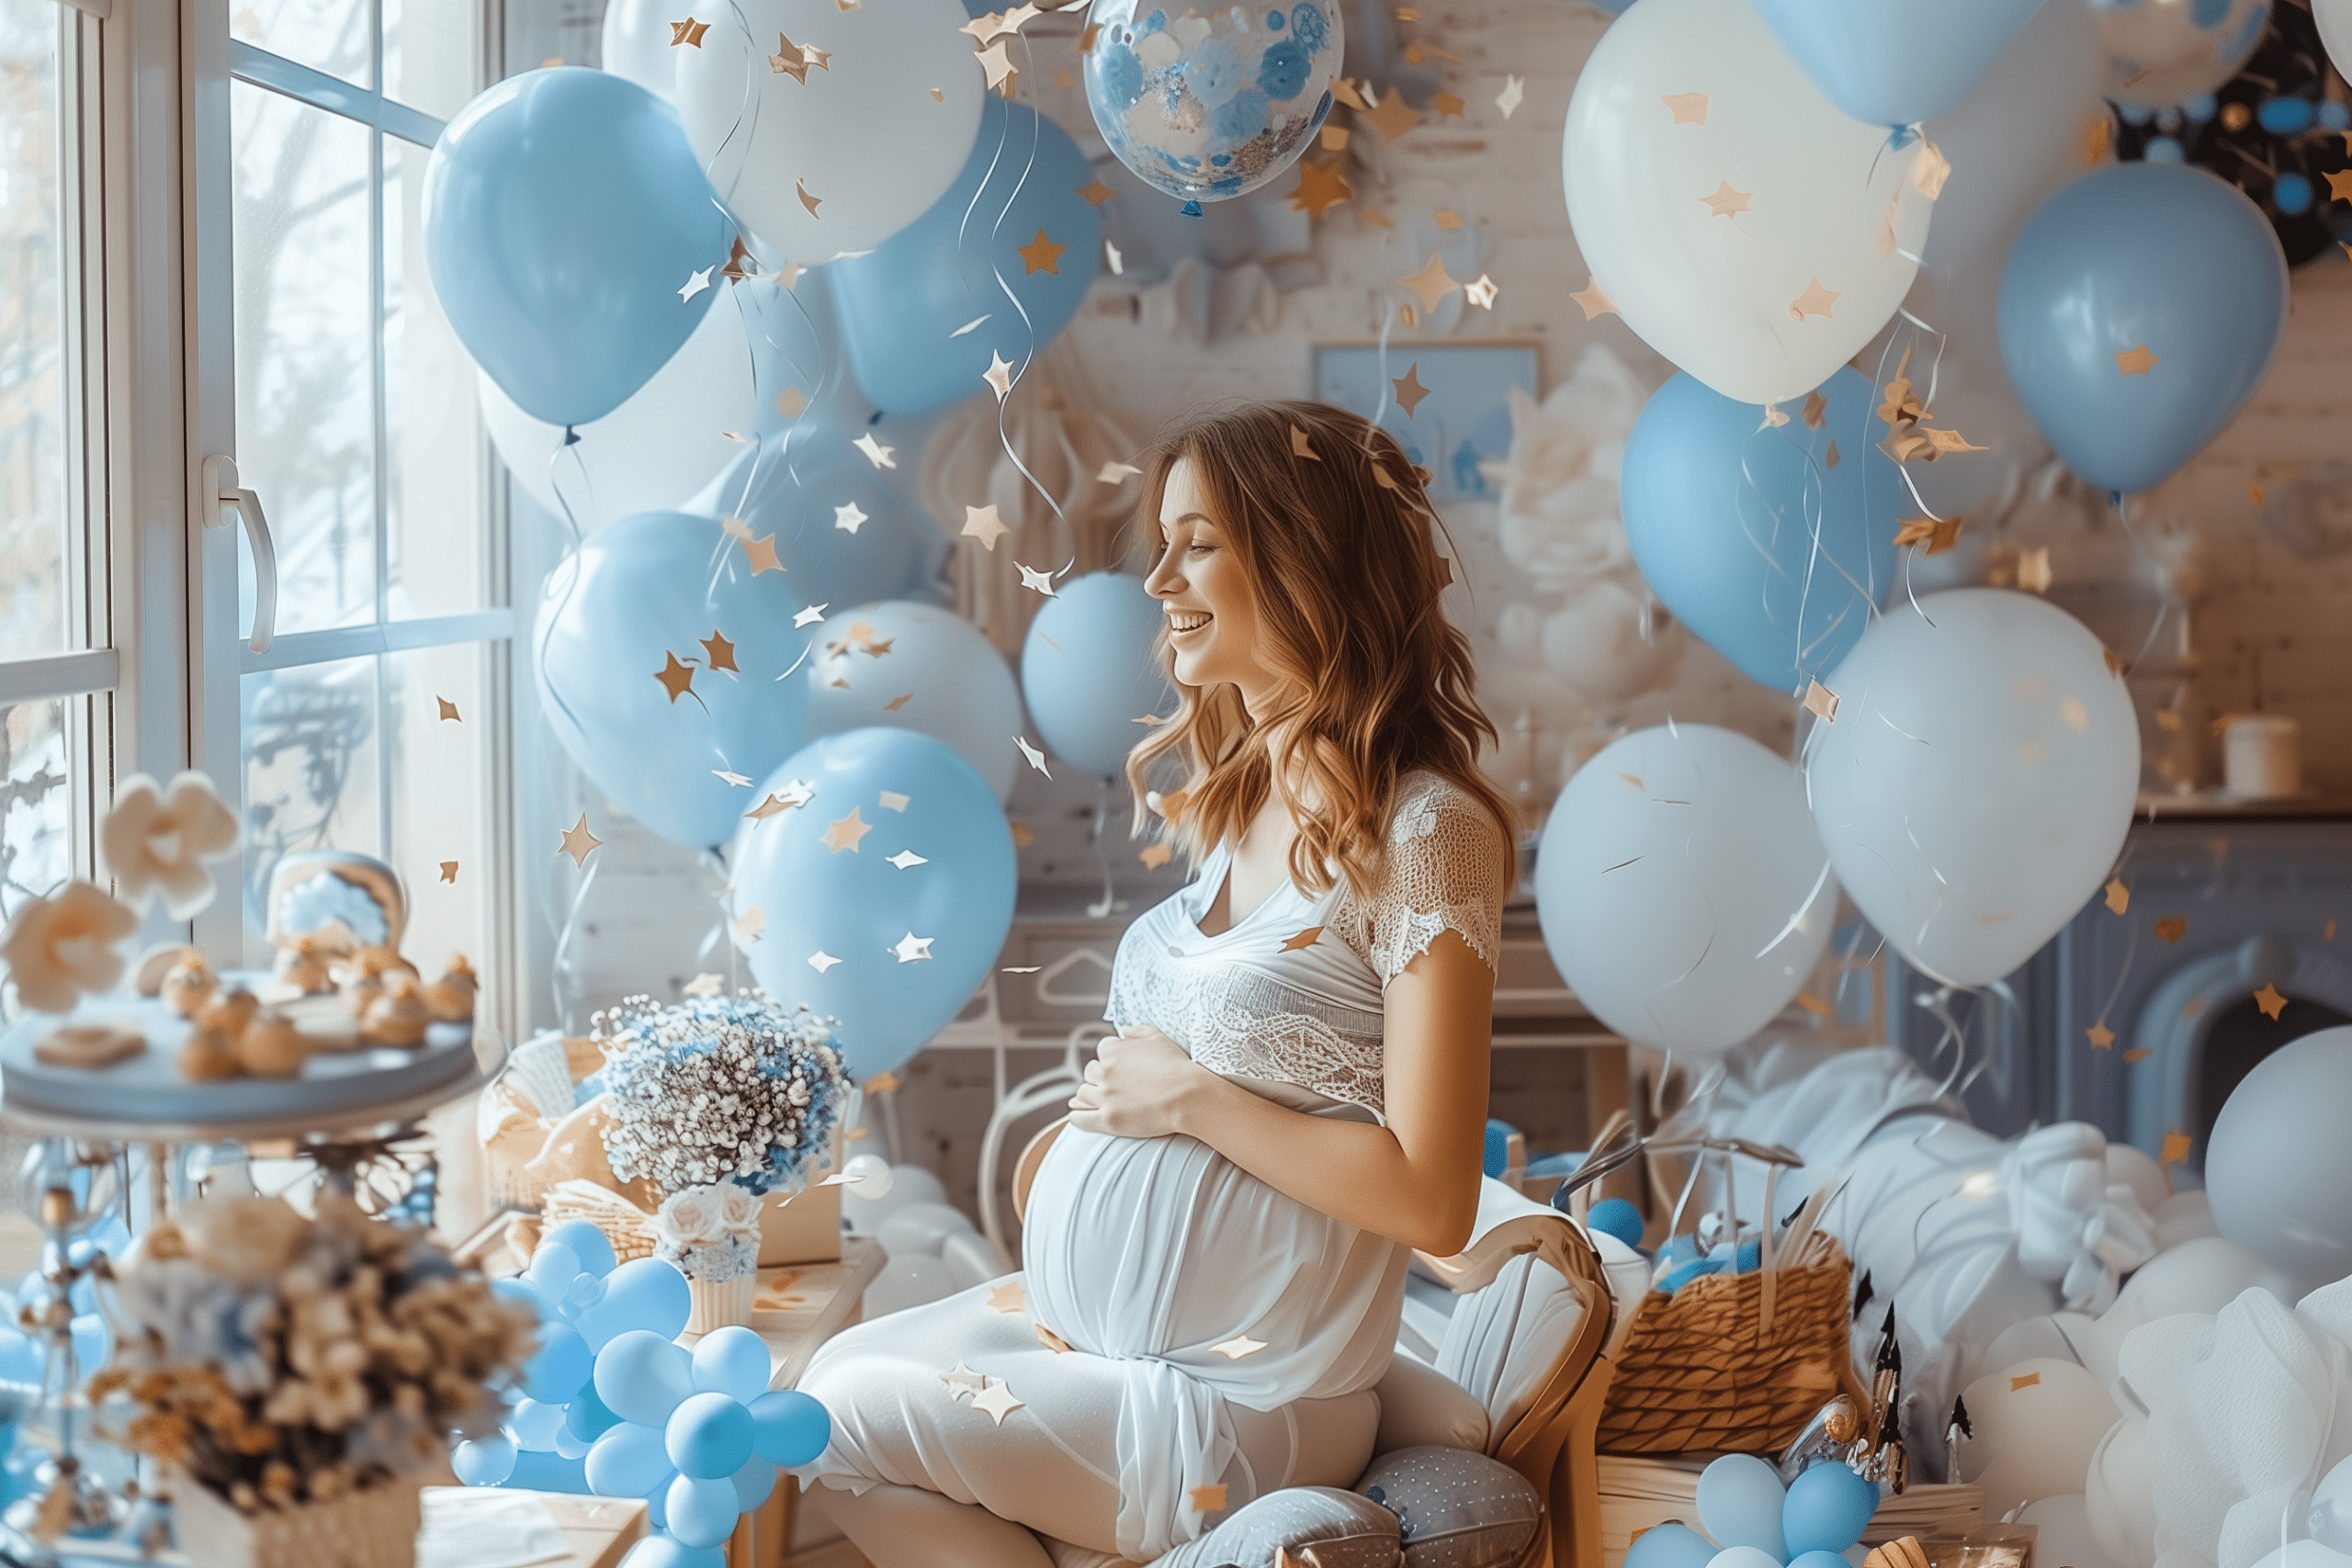 An image of baby shower for a blog on baby shower decorations ideas.